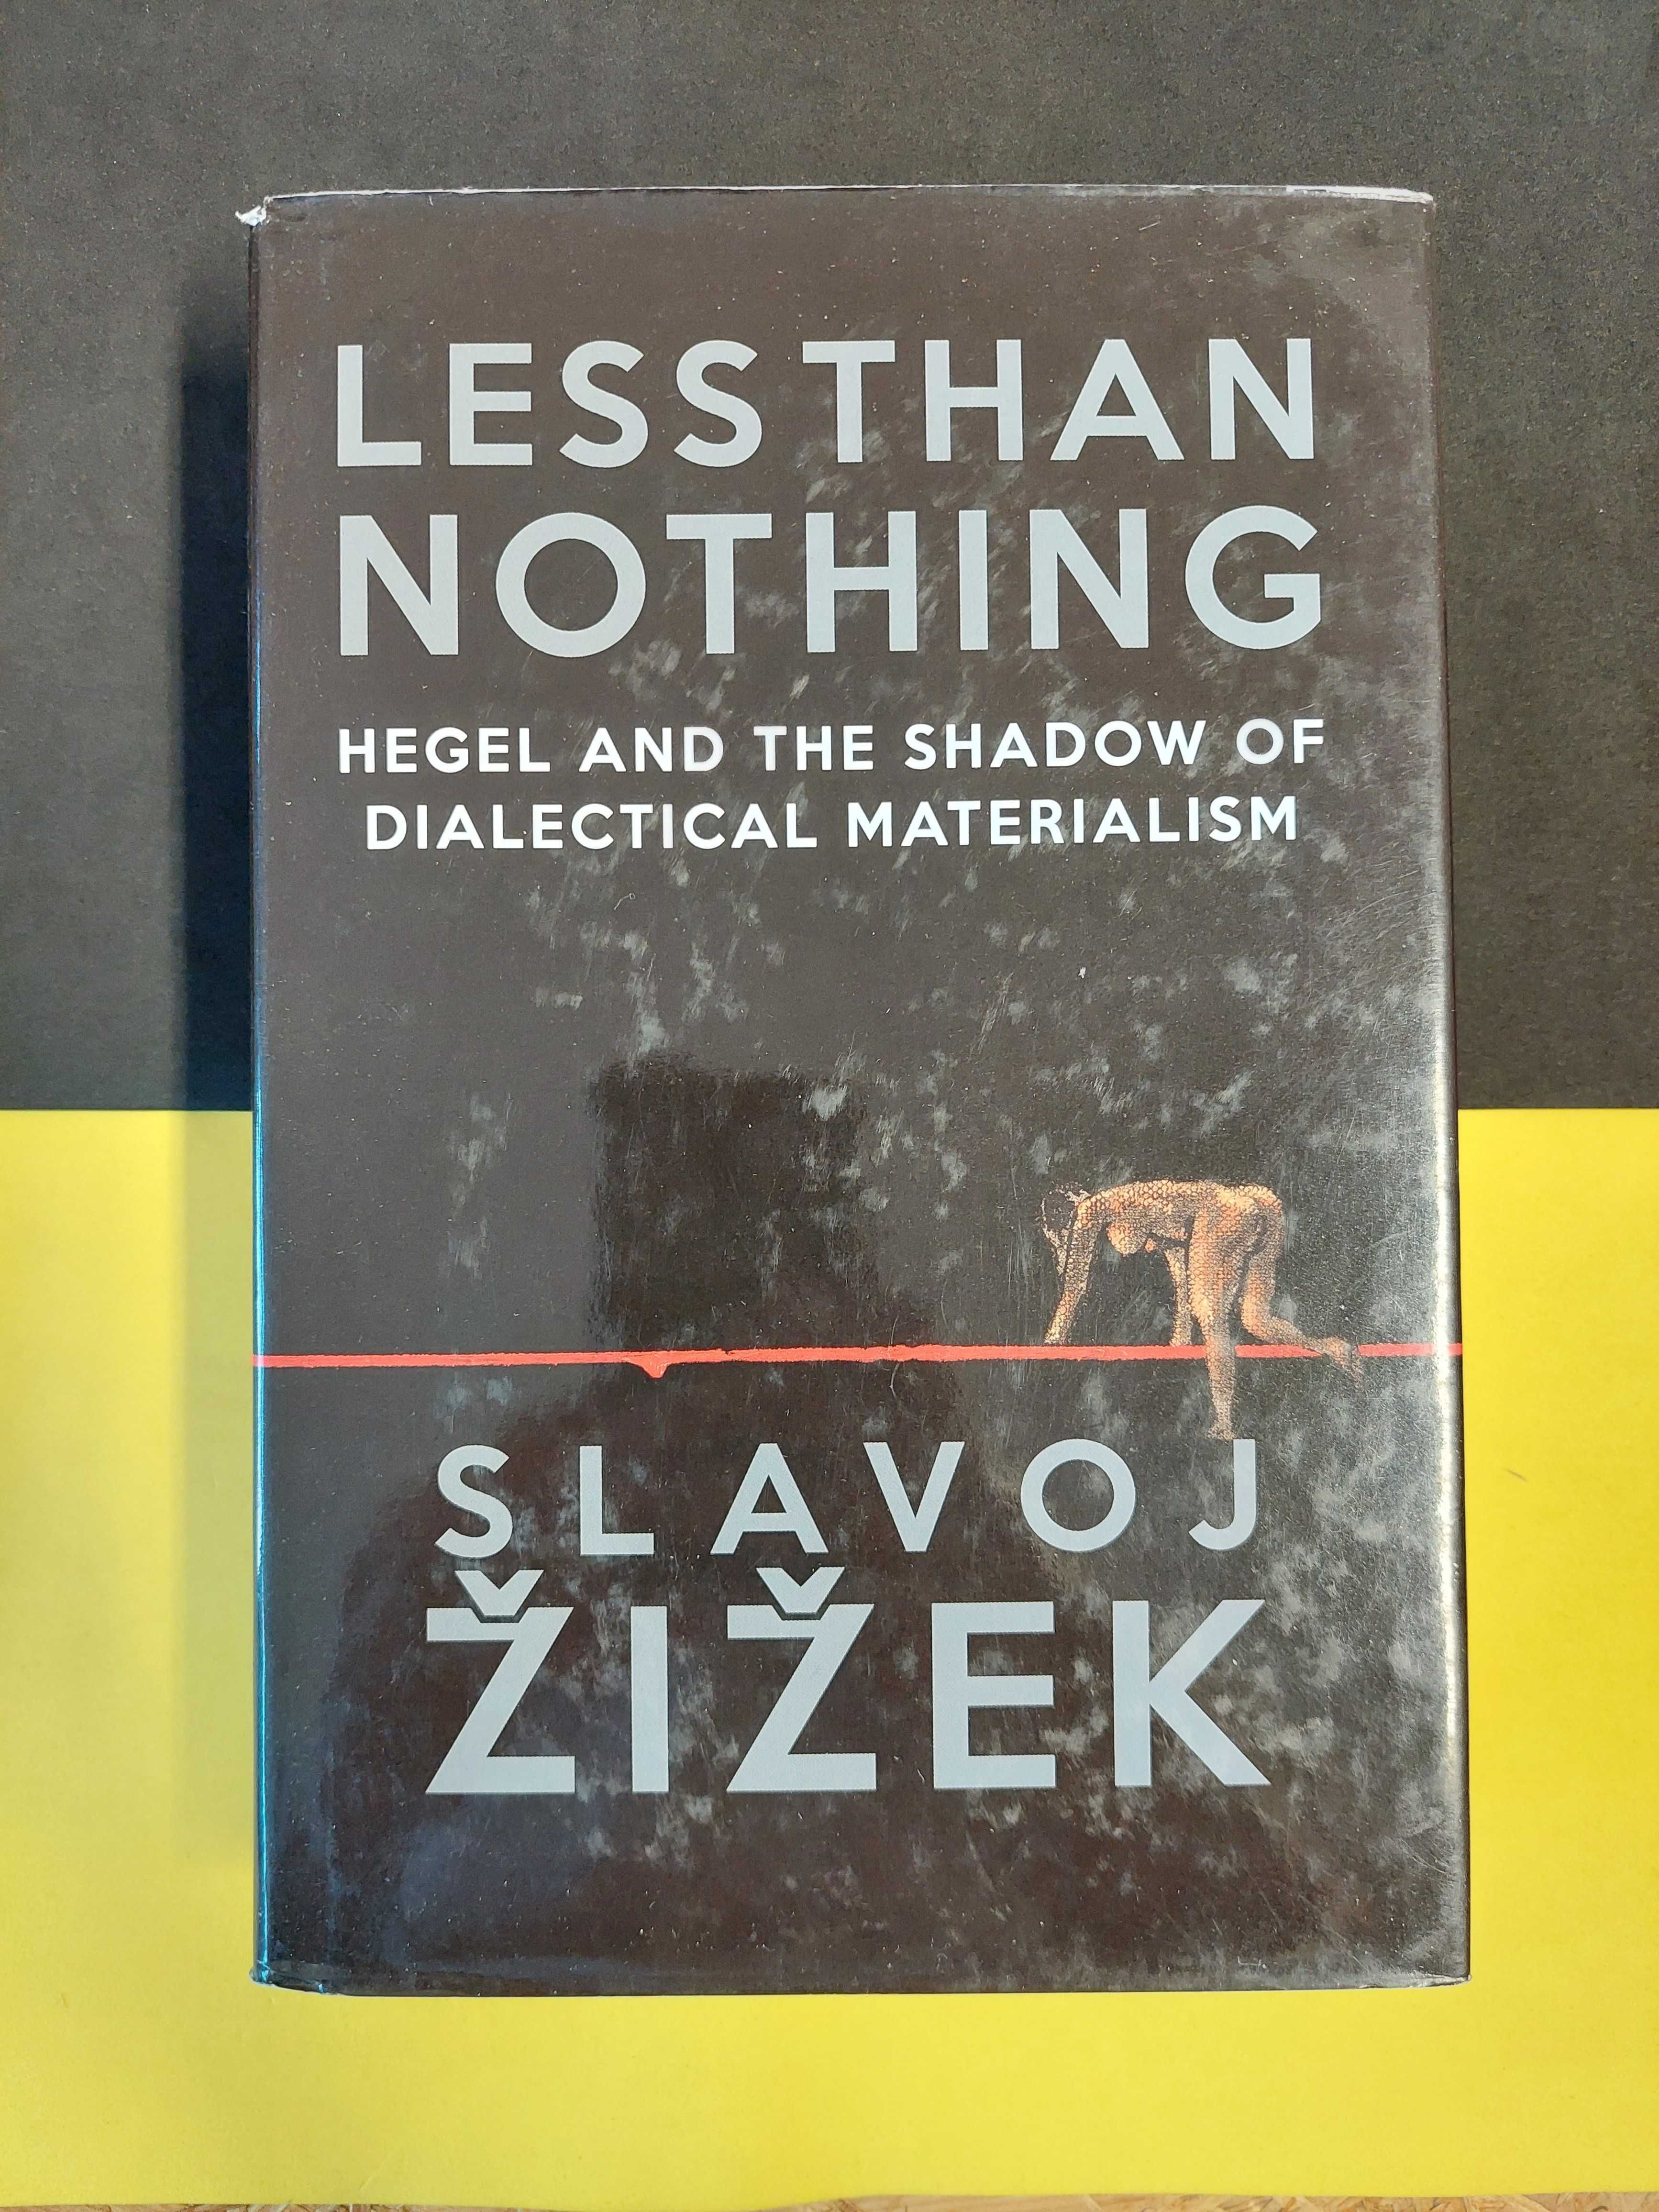 Less than nothing. Hegel and the shadow of Dialectical Materialism